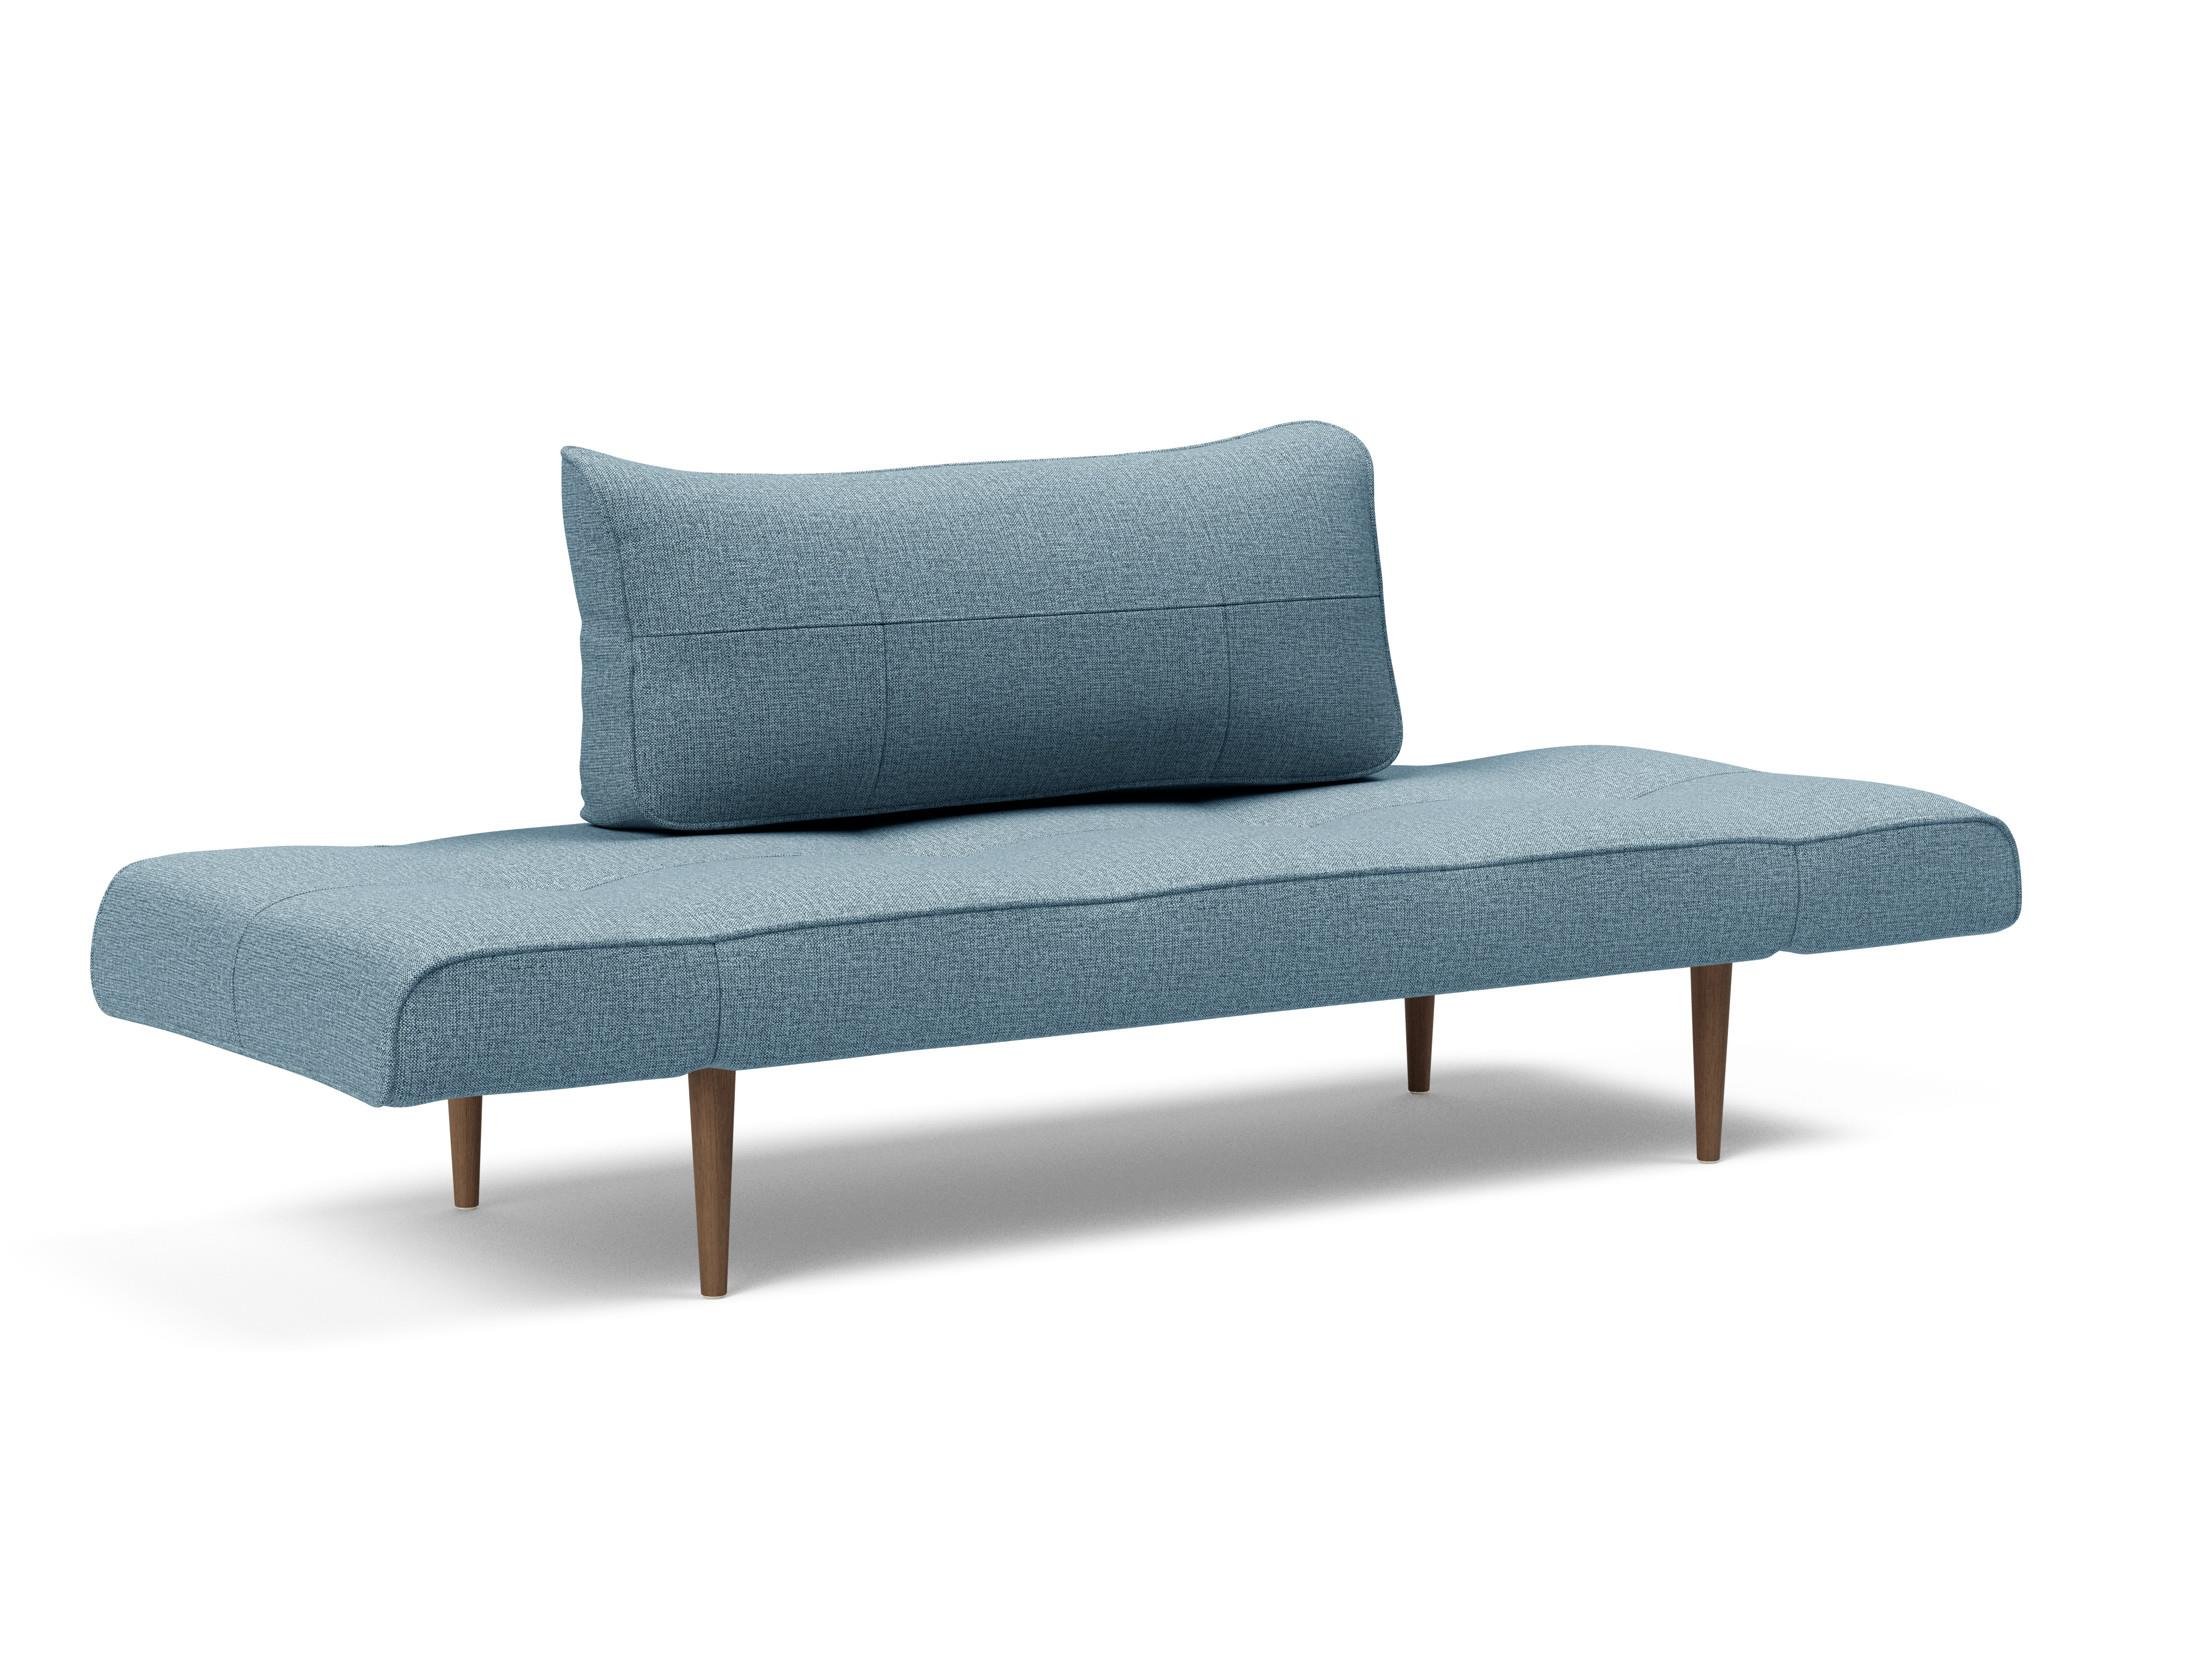 Zeal-Styletto-Daybed-525-p7-web.jpg